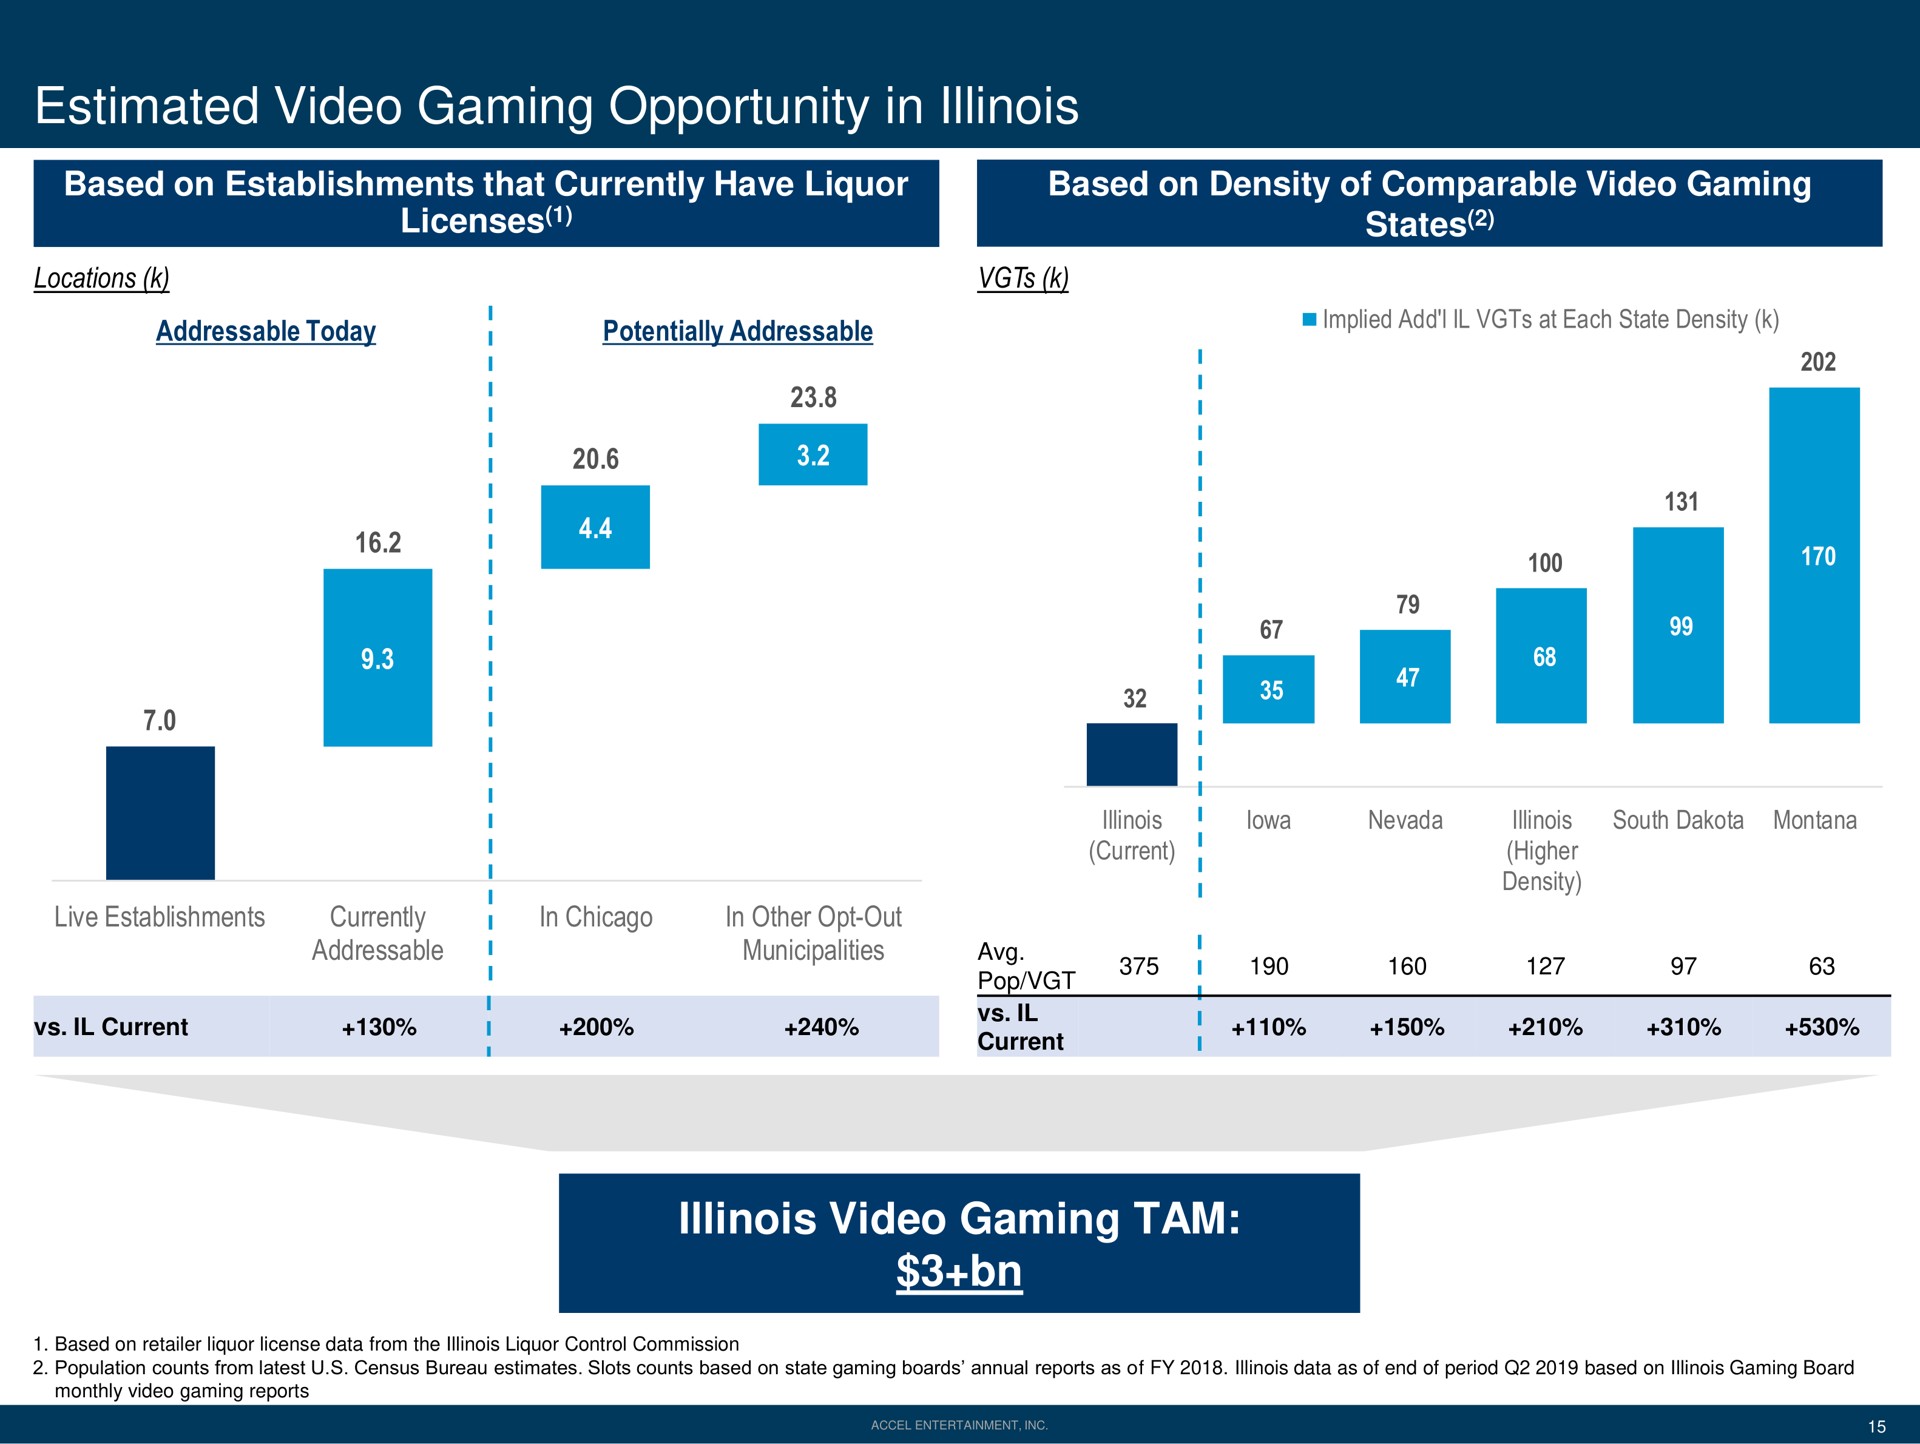 estimated video gaming opportunity in video gaming tam i current peal | Accel Entertaiment